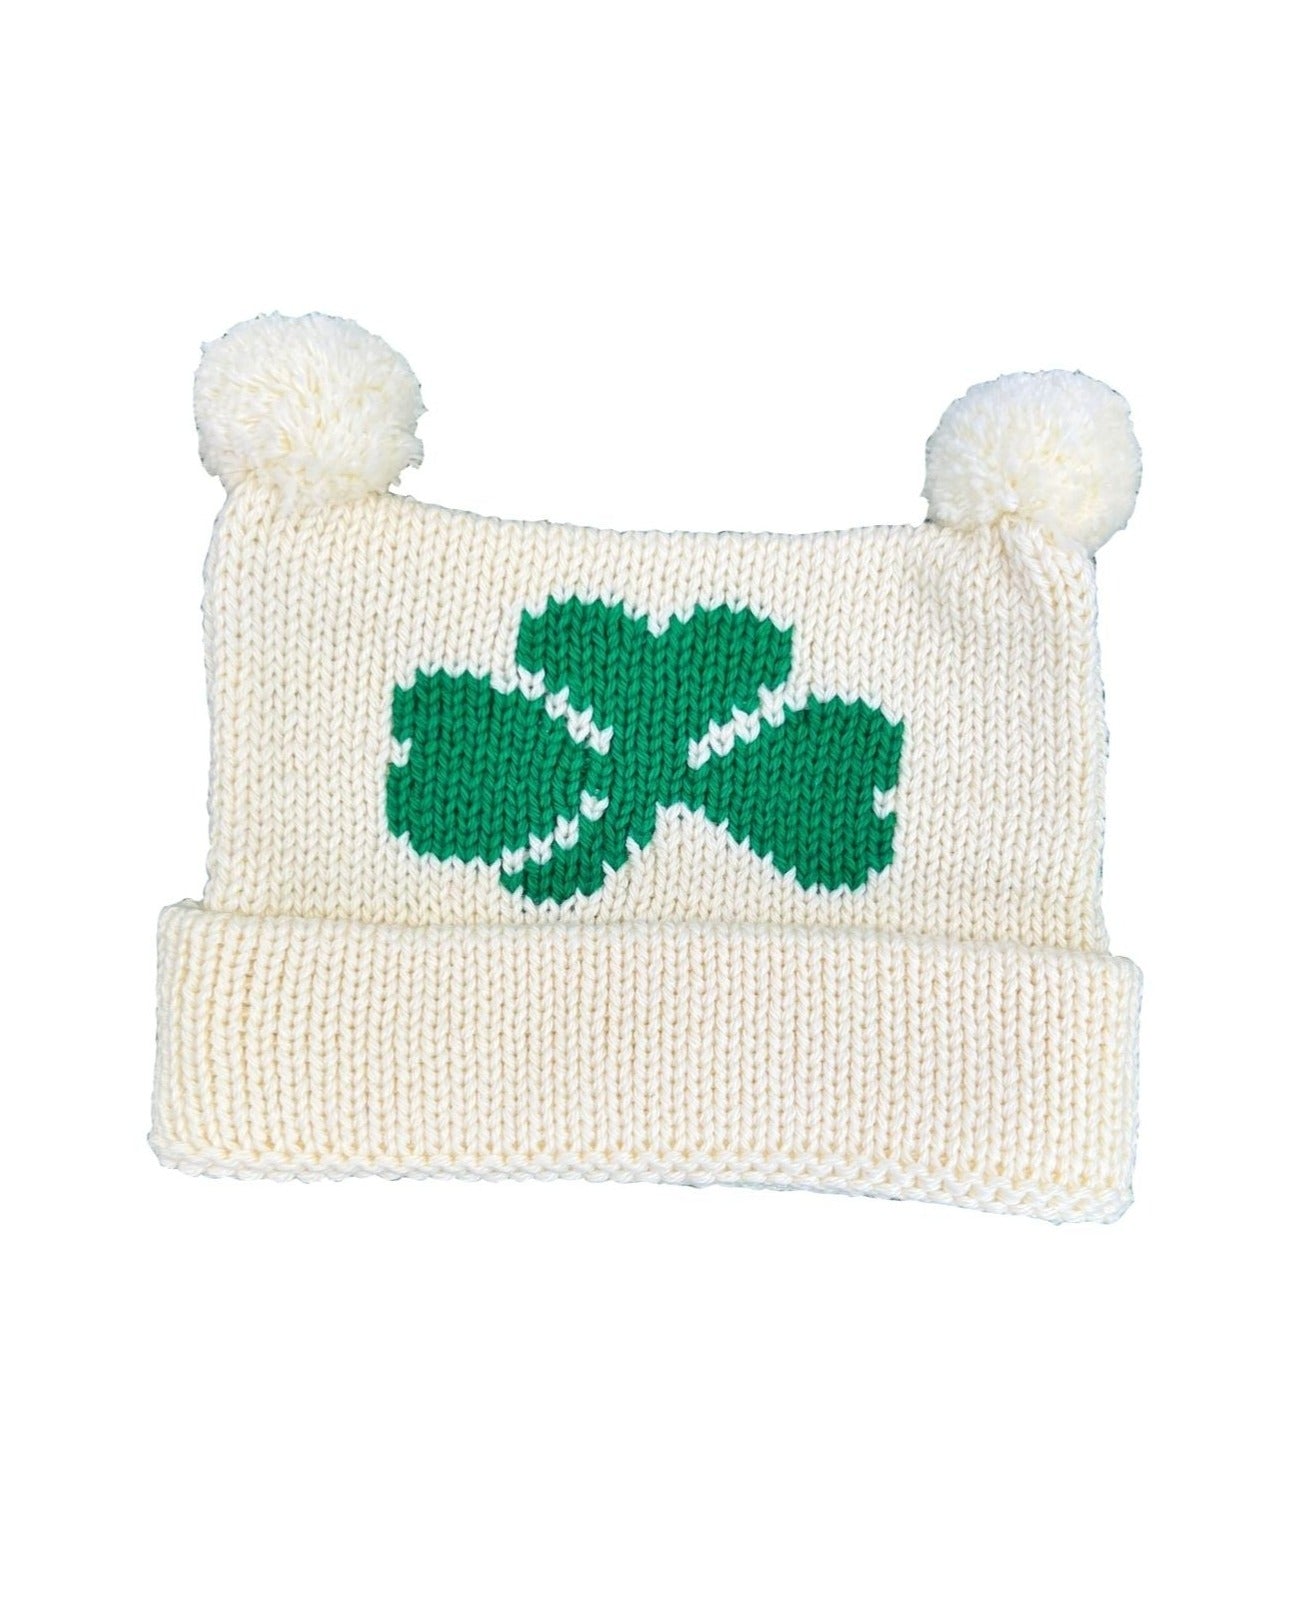 ivory hat, bottom is rolled up once with two poms at top, one green shamrock knitted in center